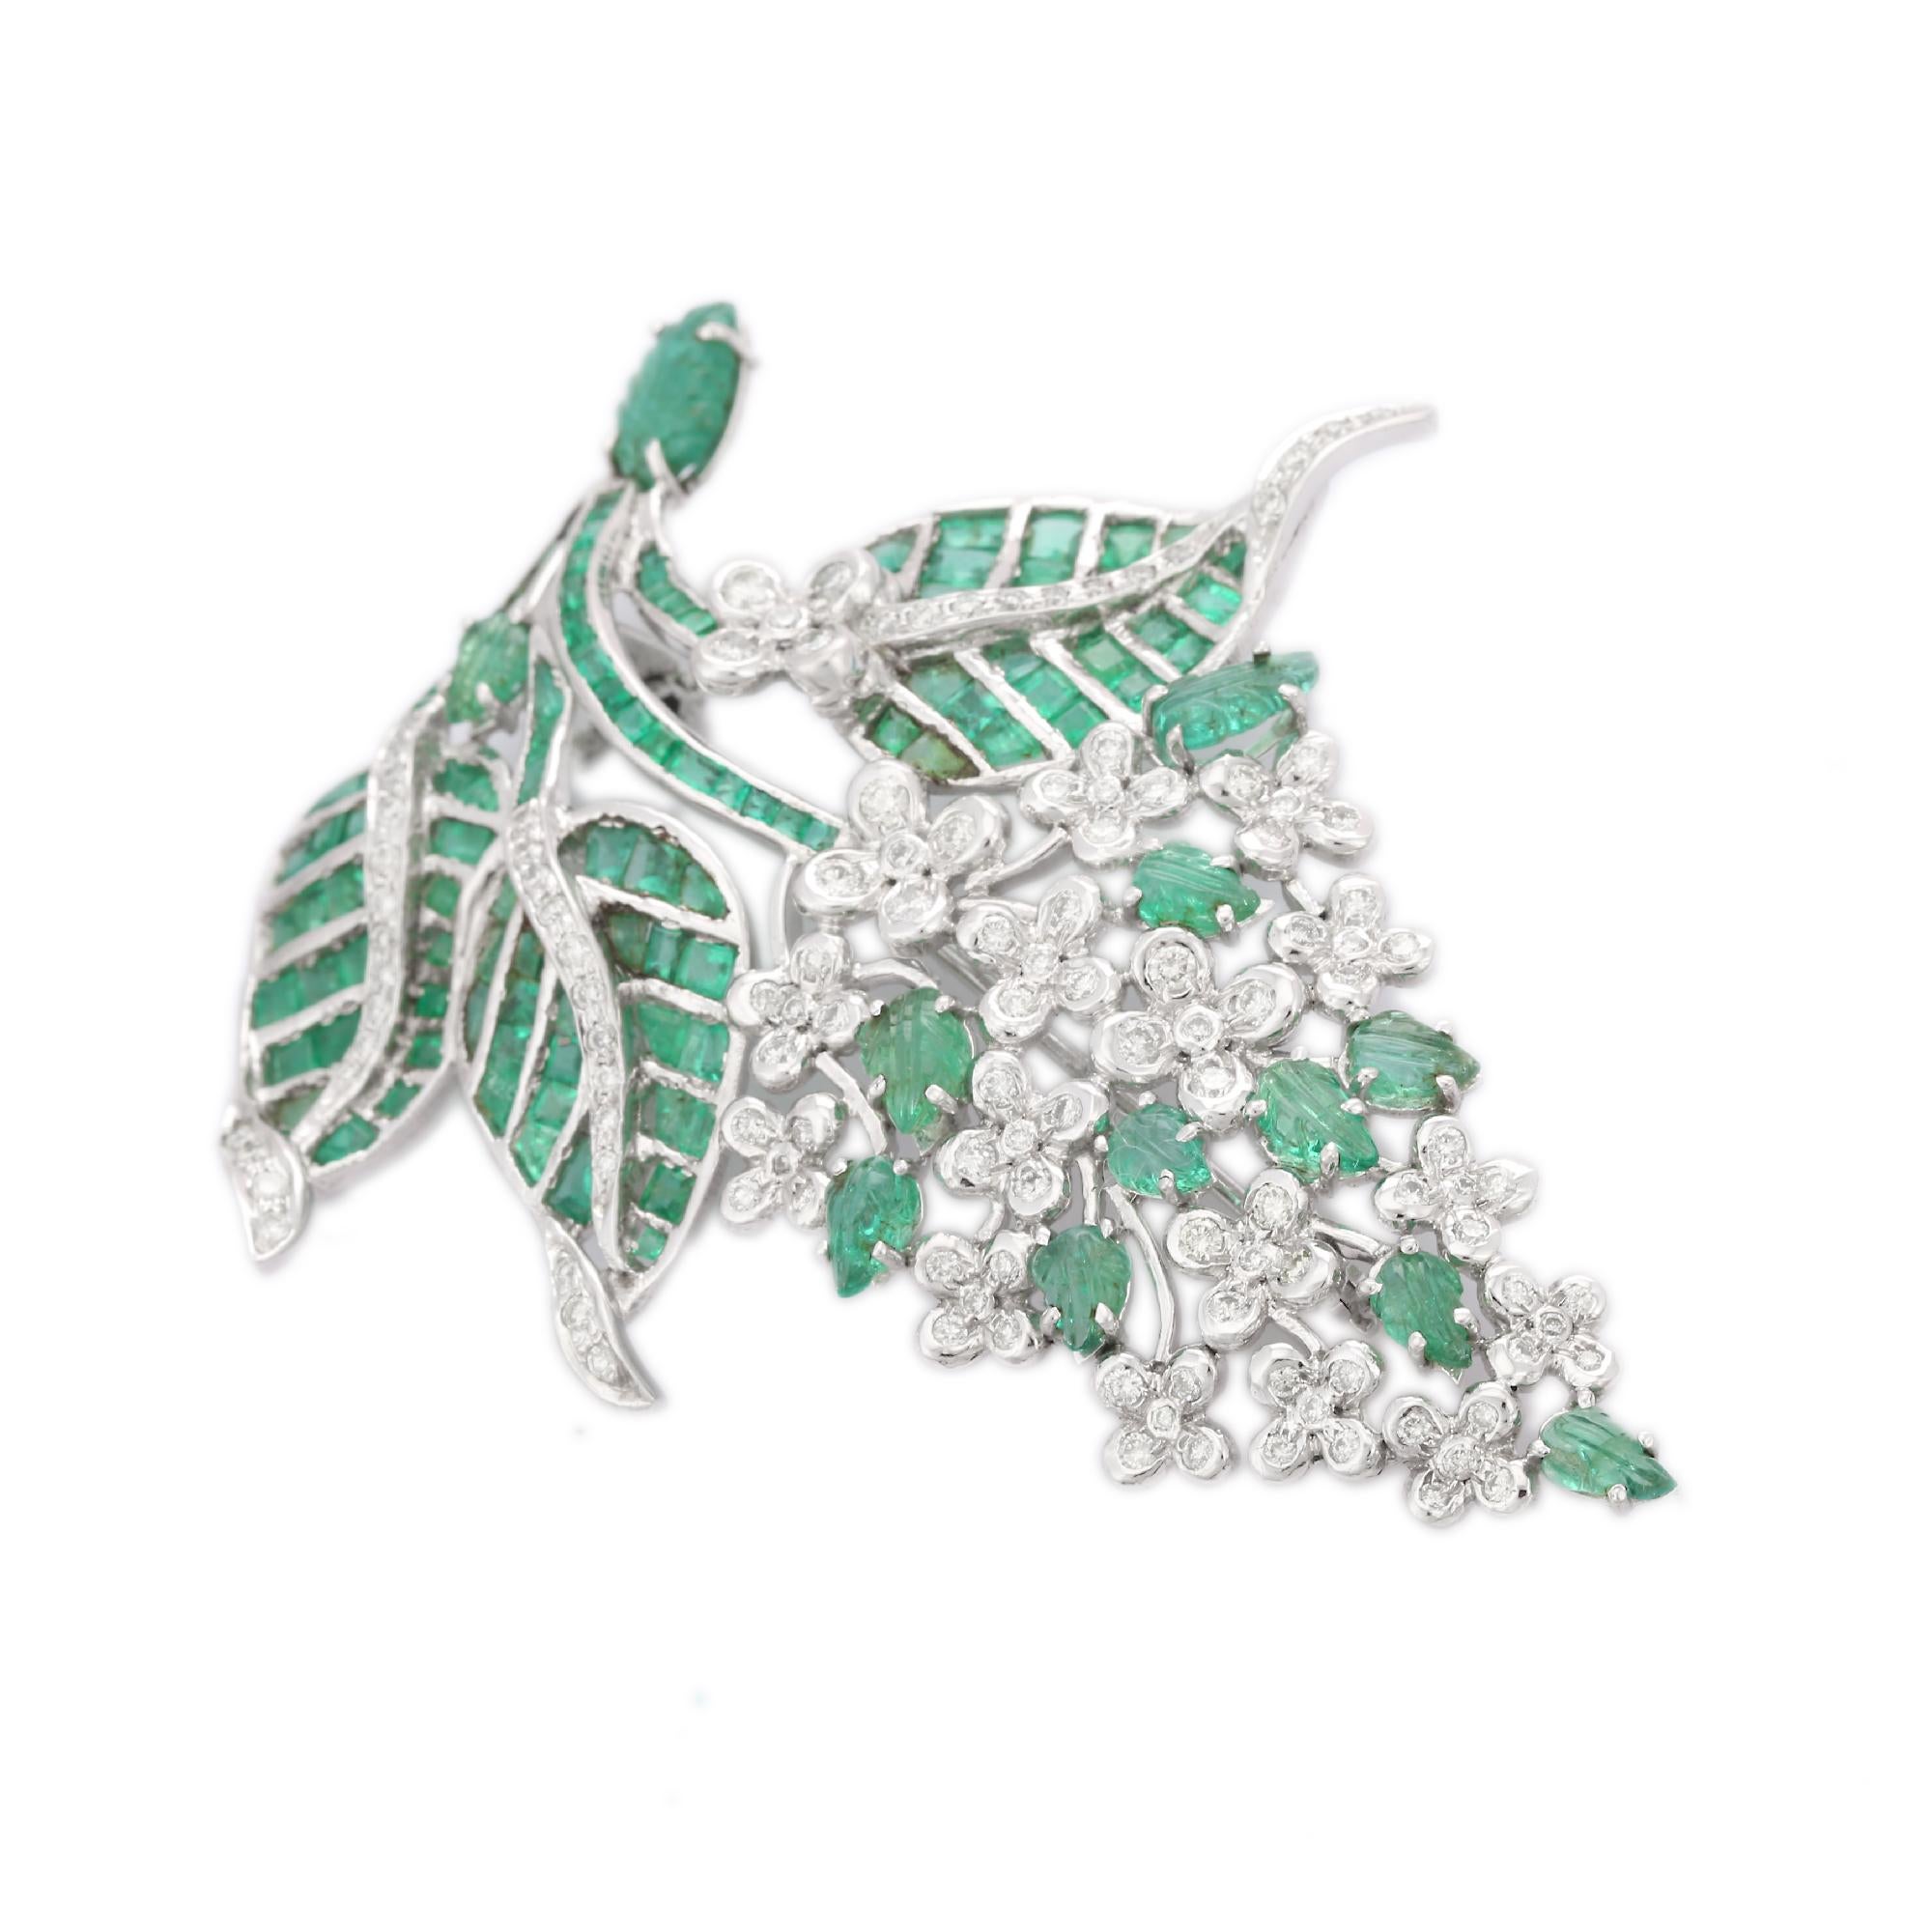 Stunning Emerald Diamond Brooch Made in 18k Gold which is a fusion of surrealism and pop-art, designed to make a bold statement. Crafted with love and attention to detail, this features 17.02 carats of emerald which makes you stand out of the crowd.